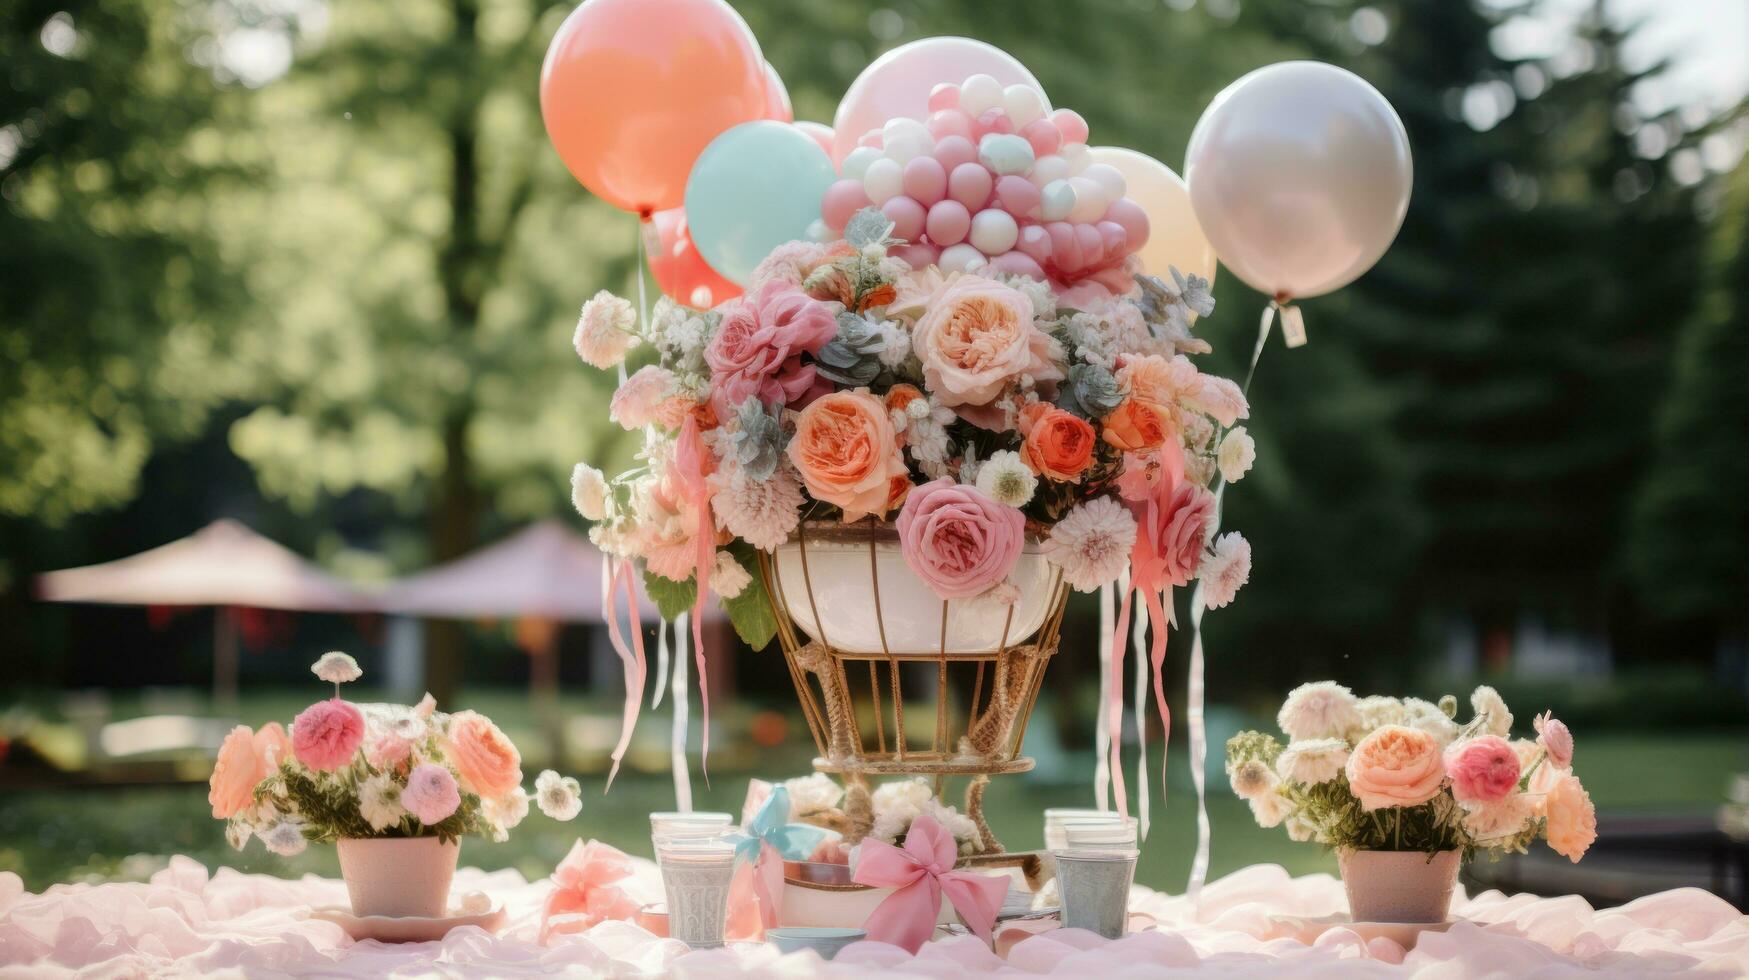 Whimsical hot air balloon centerpiece with flowers and ribbons photo